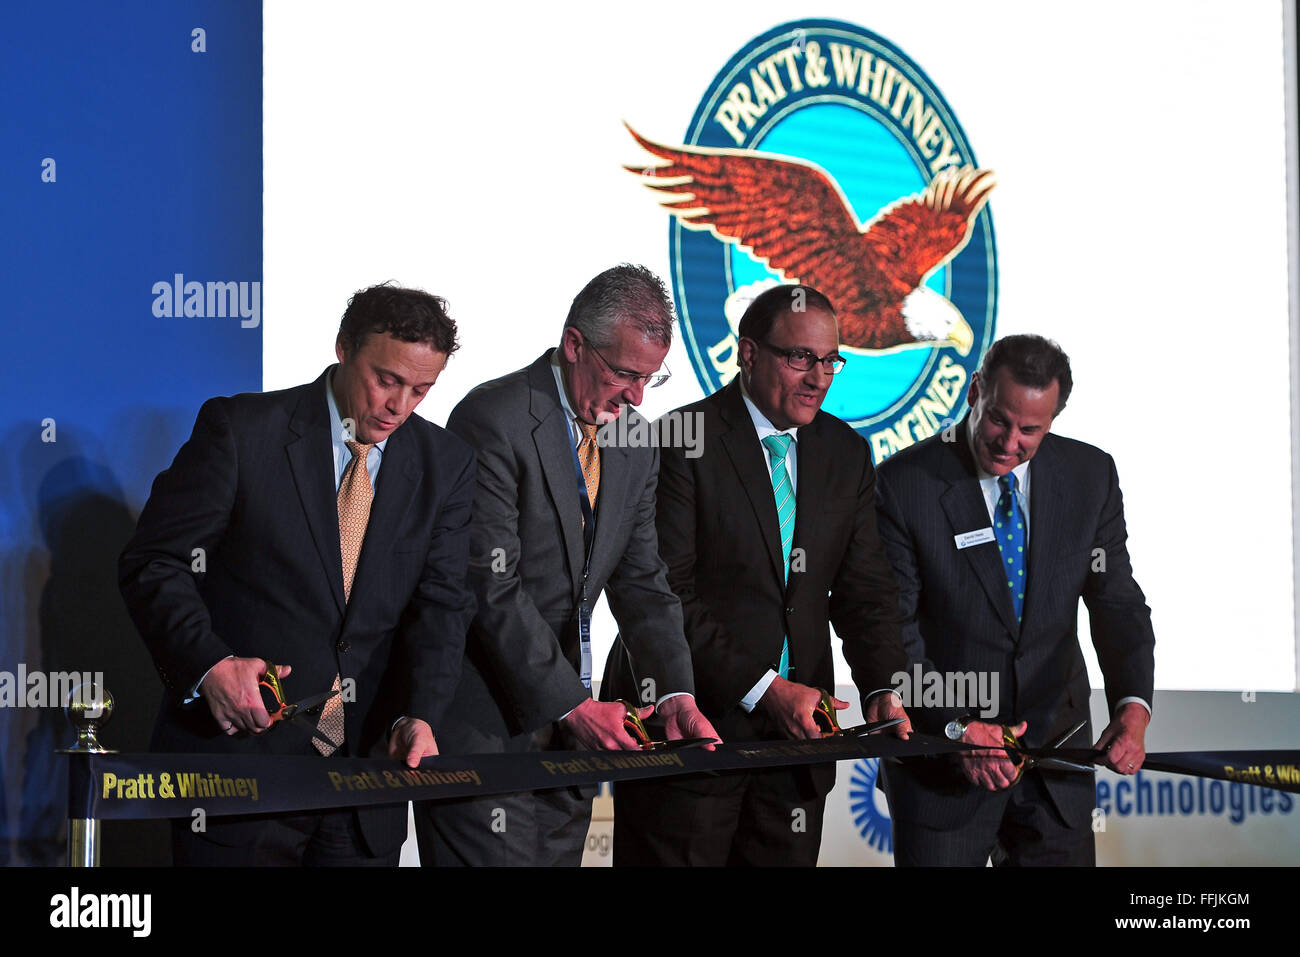 Singapore. 15th Feb, 2016. Senior Vice President of Pratt & Whitney Danny Di Perna, President of Pratt & Whitney Robert Leduc, Singapore's Minister for Trade and Industry S. Iswaran and Executive Vice President of United Technologies David Hess (from L to R) attend an opening ceremony at Singapore's Seletar Aerospace Park, Feb, 15, 2016. American aircraft-engine maker Pratt & Whitney on Monday announced the official opening of its first manufacturing facility in Singapore. © Then Chih Wey/Xinhua/Alamy Live News Stock Photo